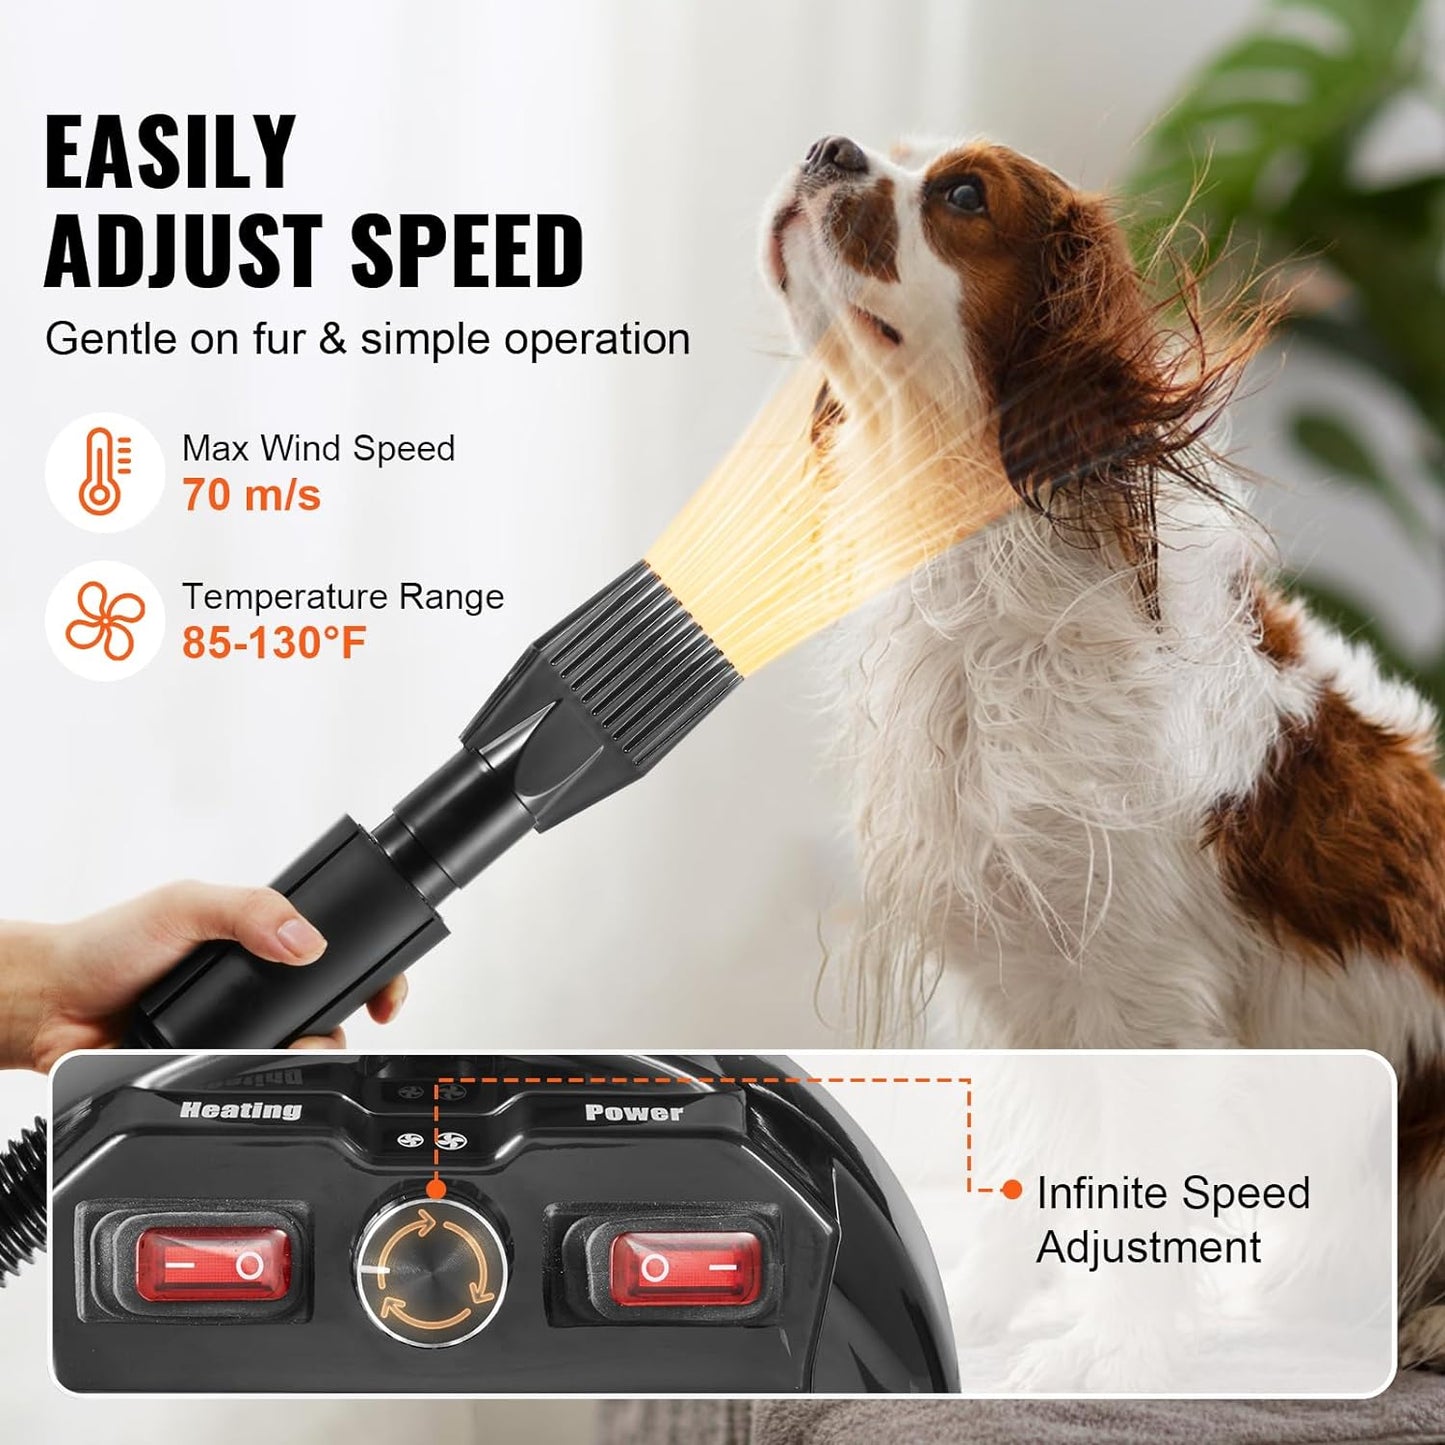 VEVOR Dog Dryer, 2800W\/4.3 HP Dog Blow Dryer, Pet Grooming Dryer with Adjustable Speed and Temperature Control, Pet Hair Dryer with 4 Nozzles and Extendable Hose (Grey and Black)